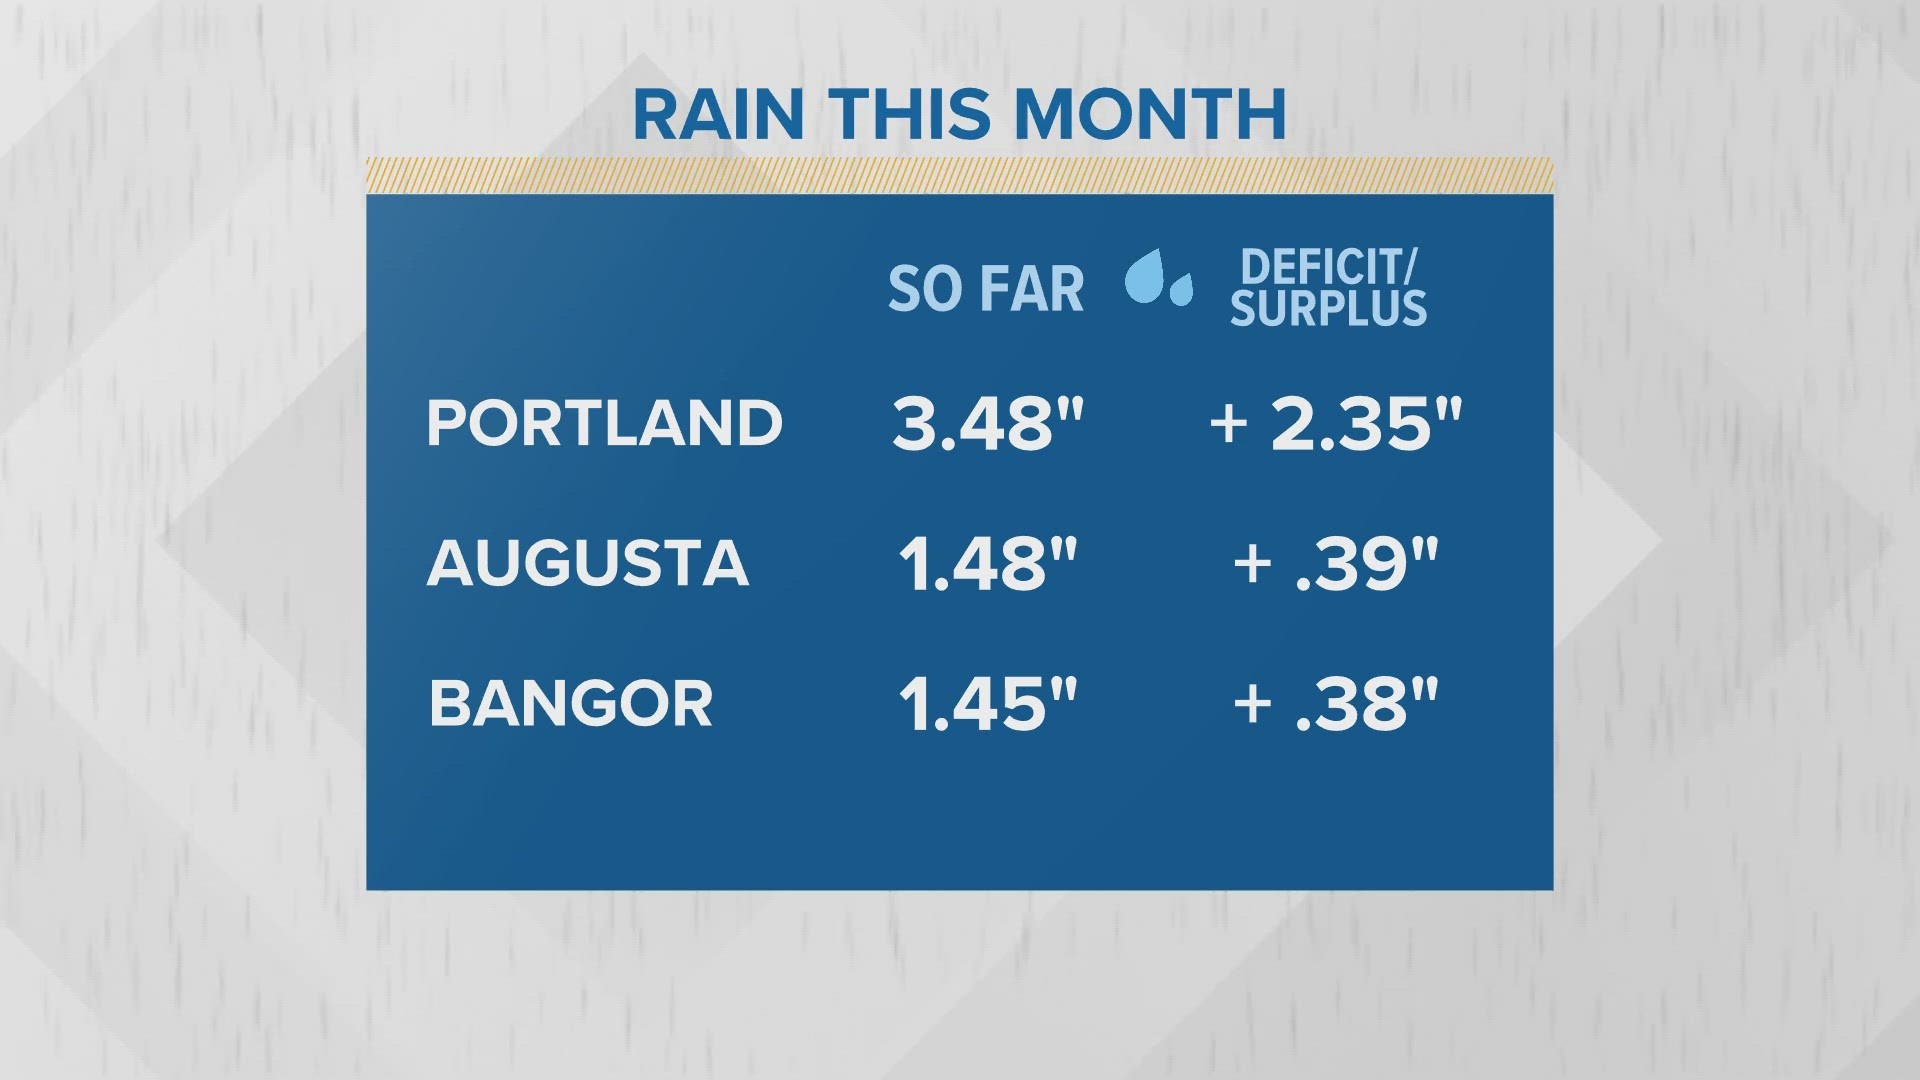 New England received a lot of rain on Monday. Vermont, New Hampshire, and parts of New York and Massachusetts received the most rainfall.